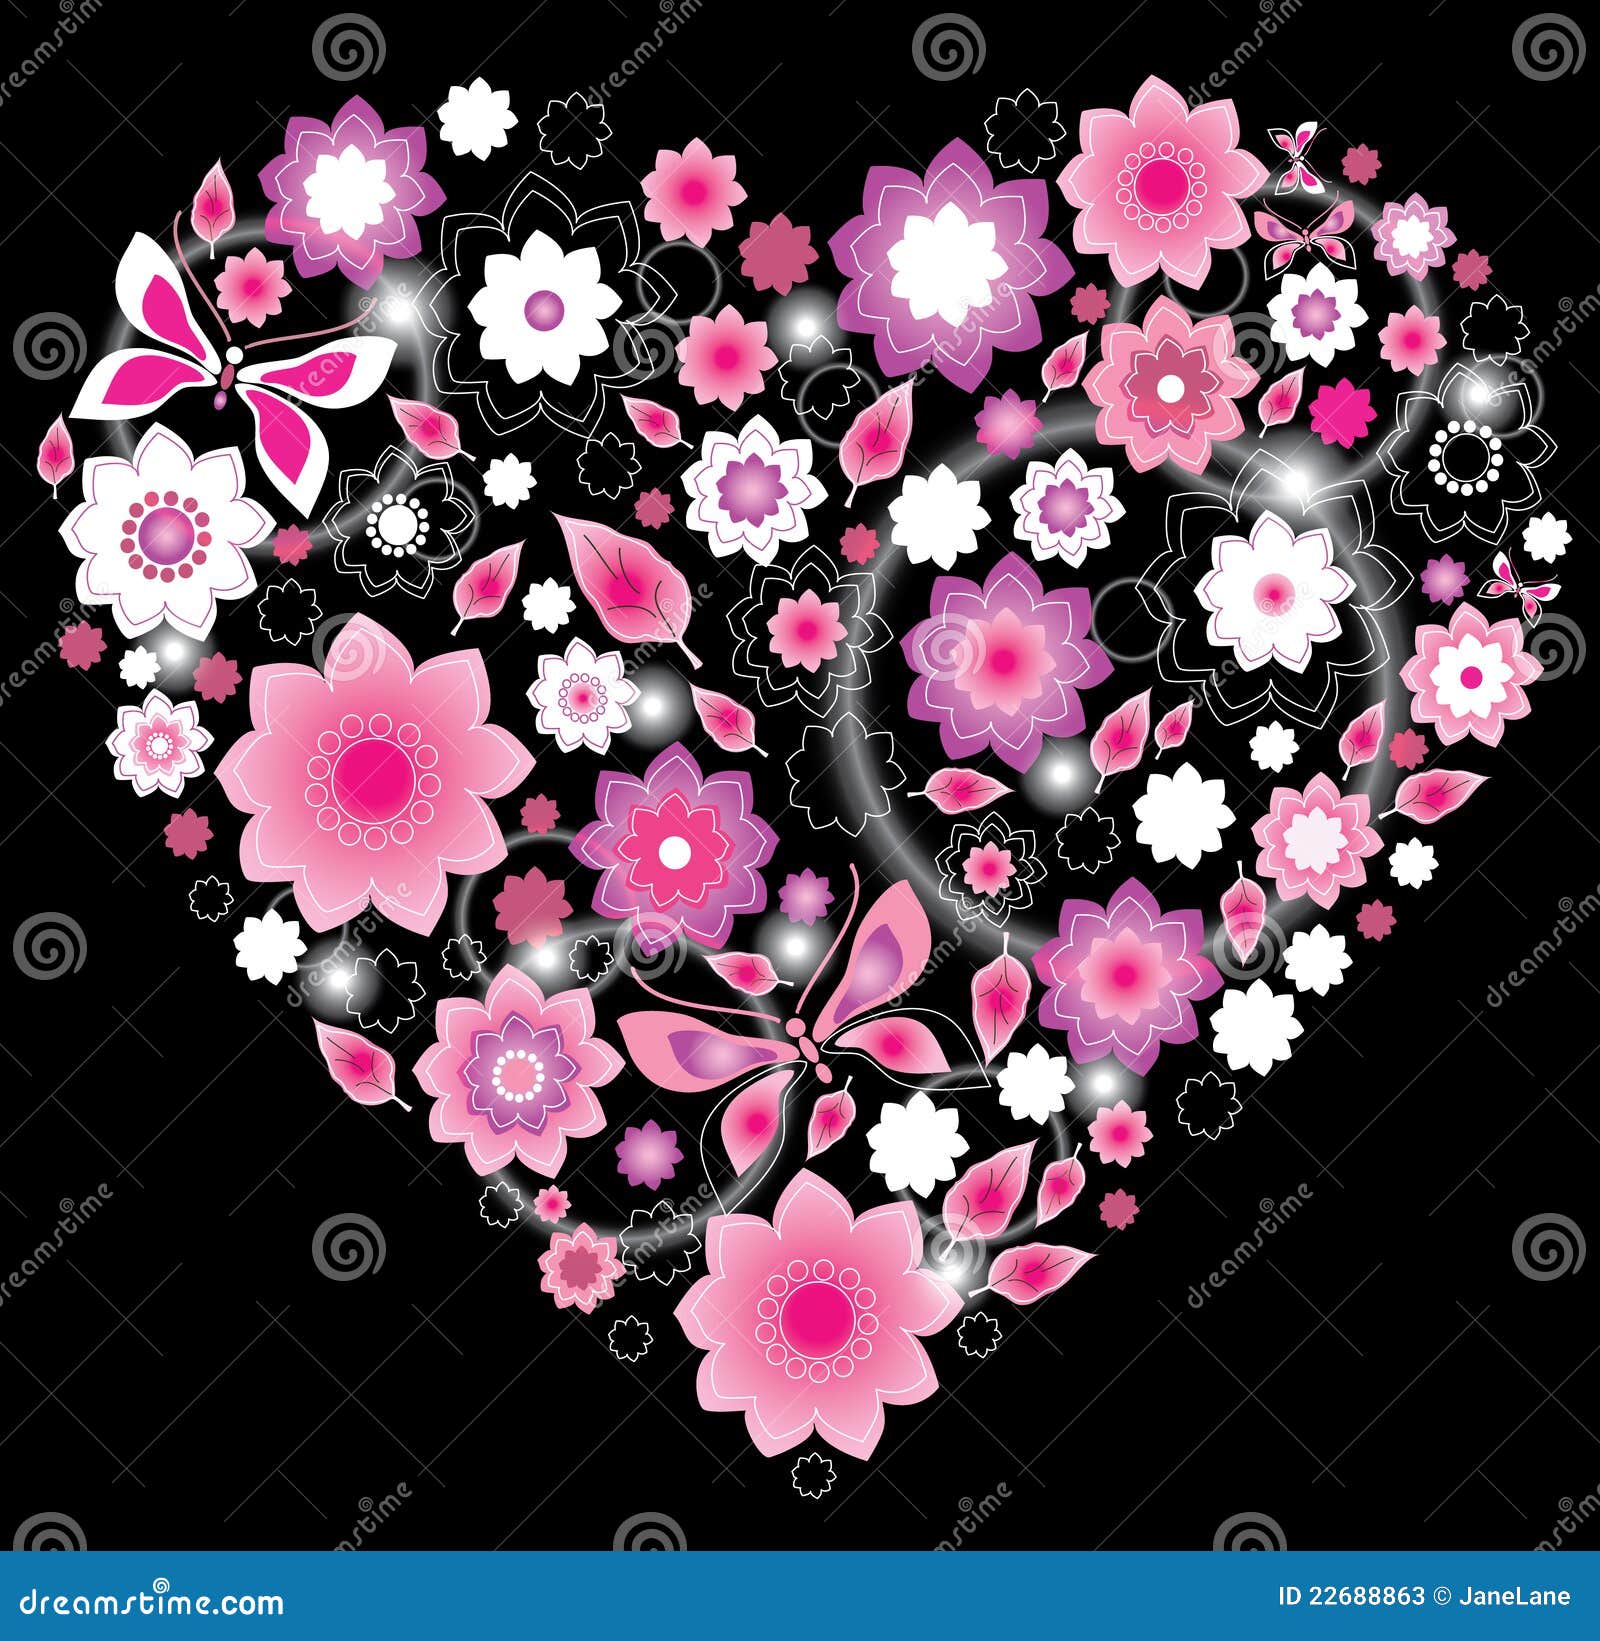 Floral Bright Pink Heart Stock Photos - Image: 22688863